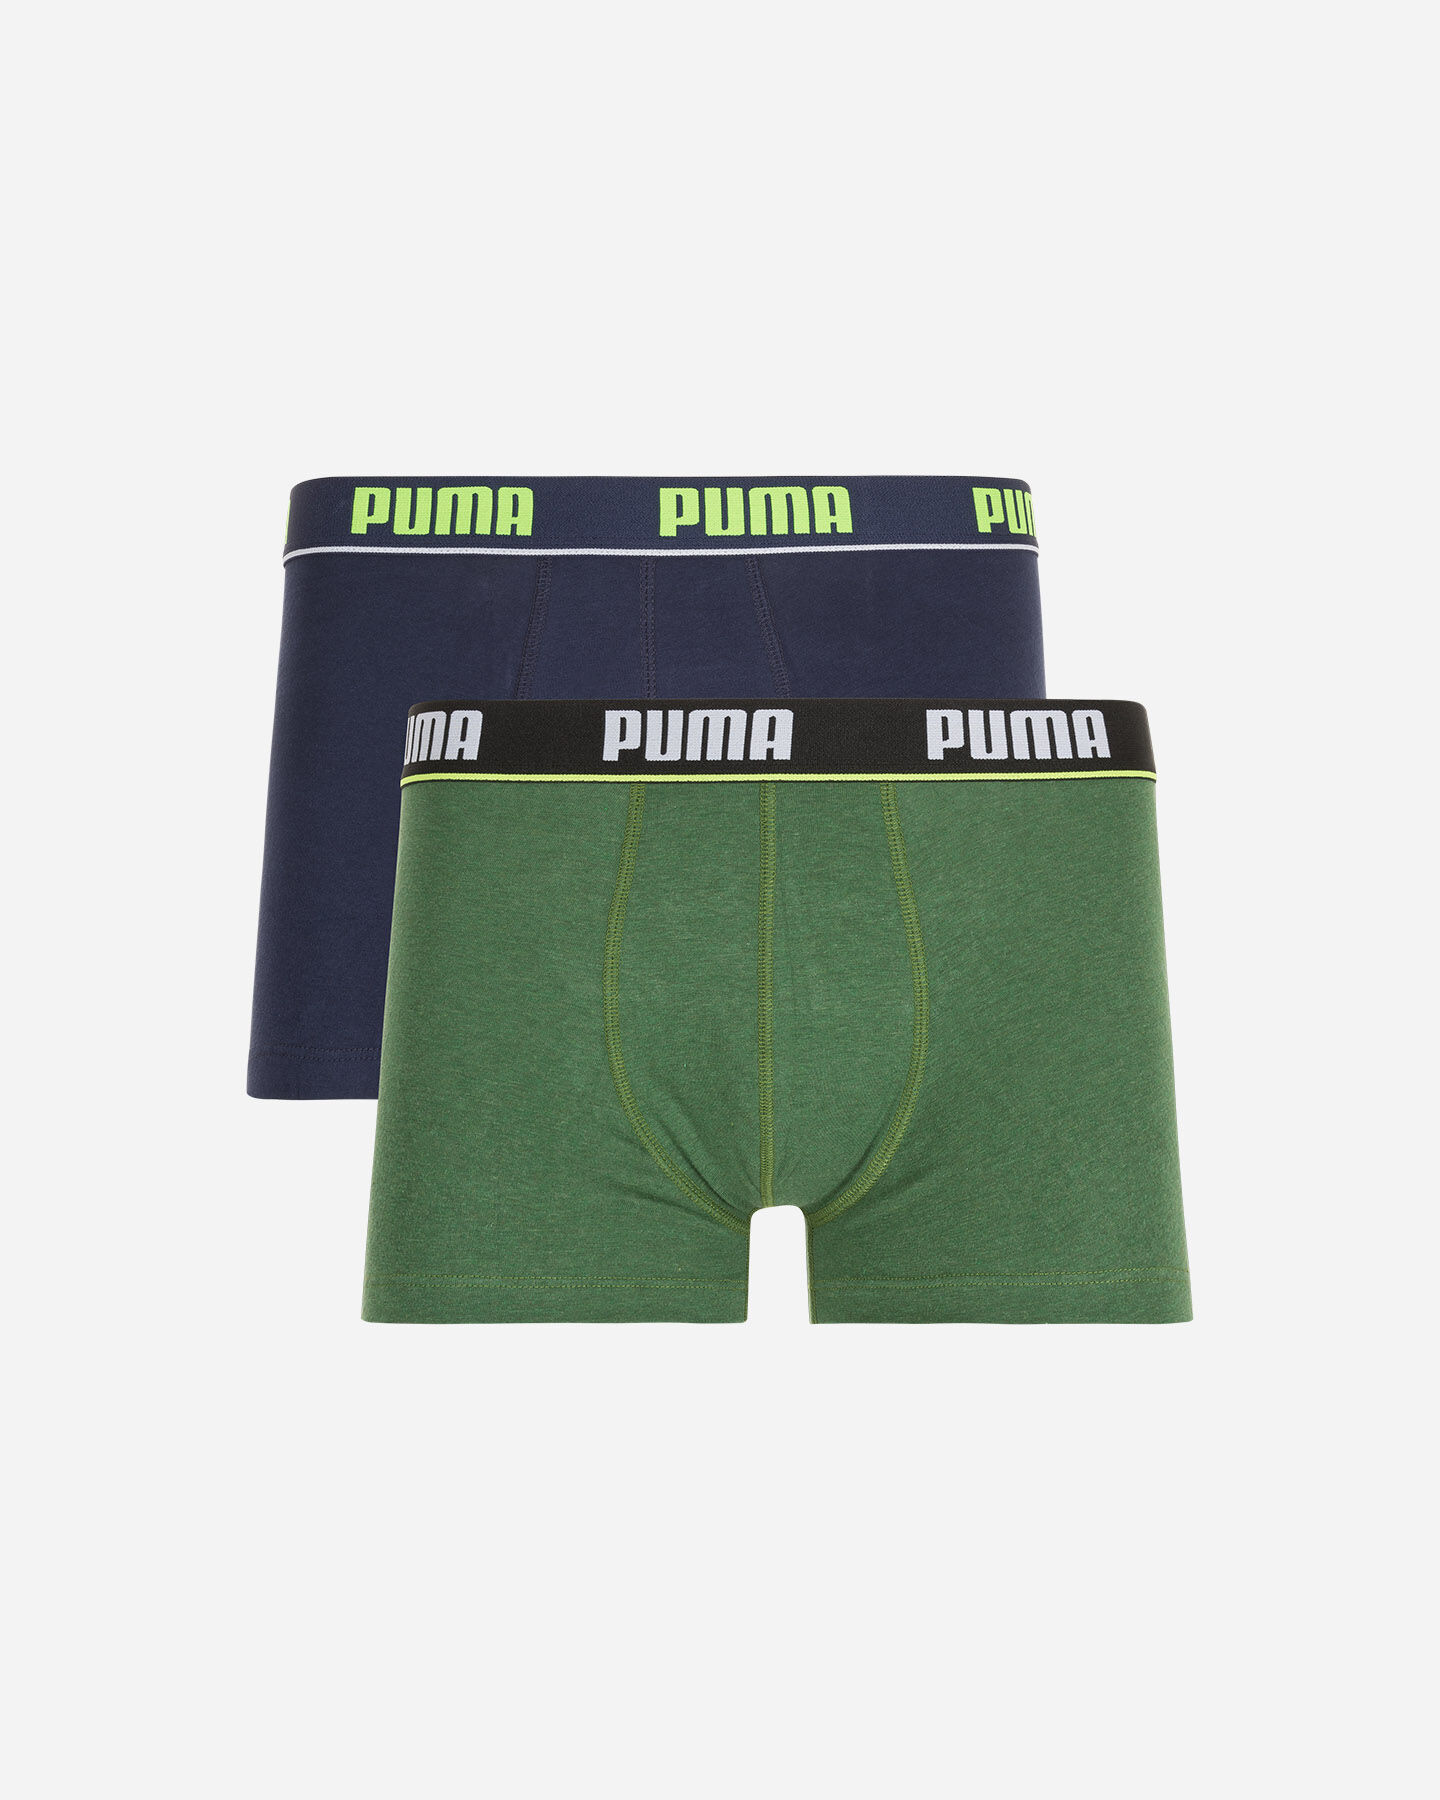  Intimo PUMA 2 PACK BOXER SHORT M S4076470|439|020 scatto 0